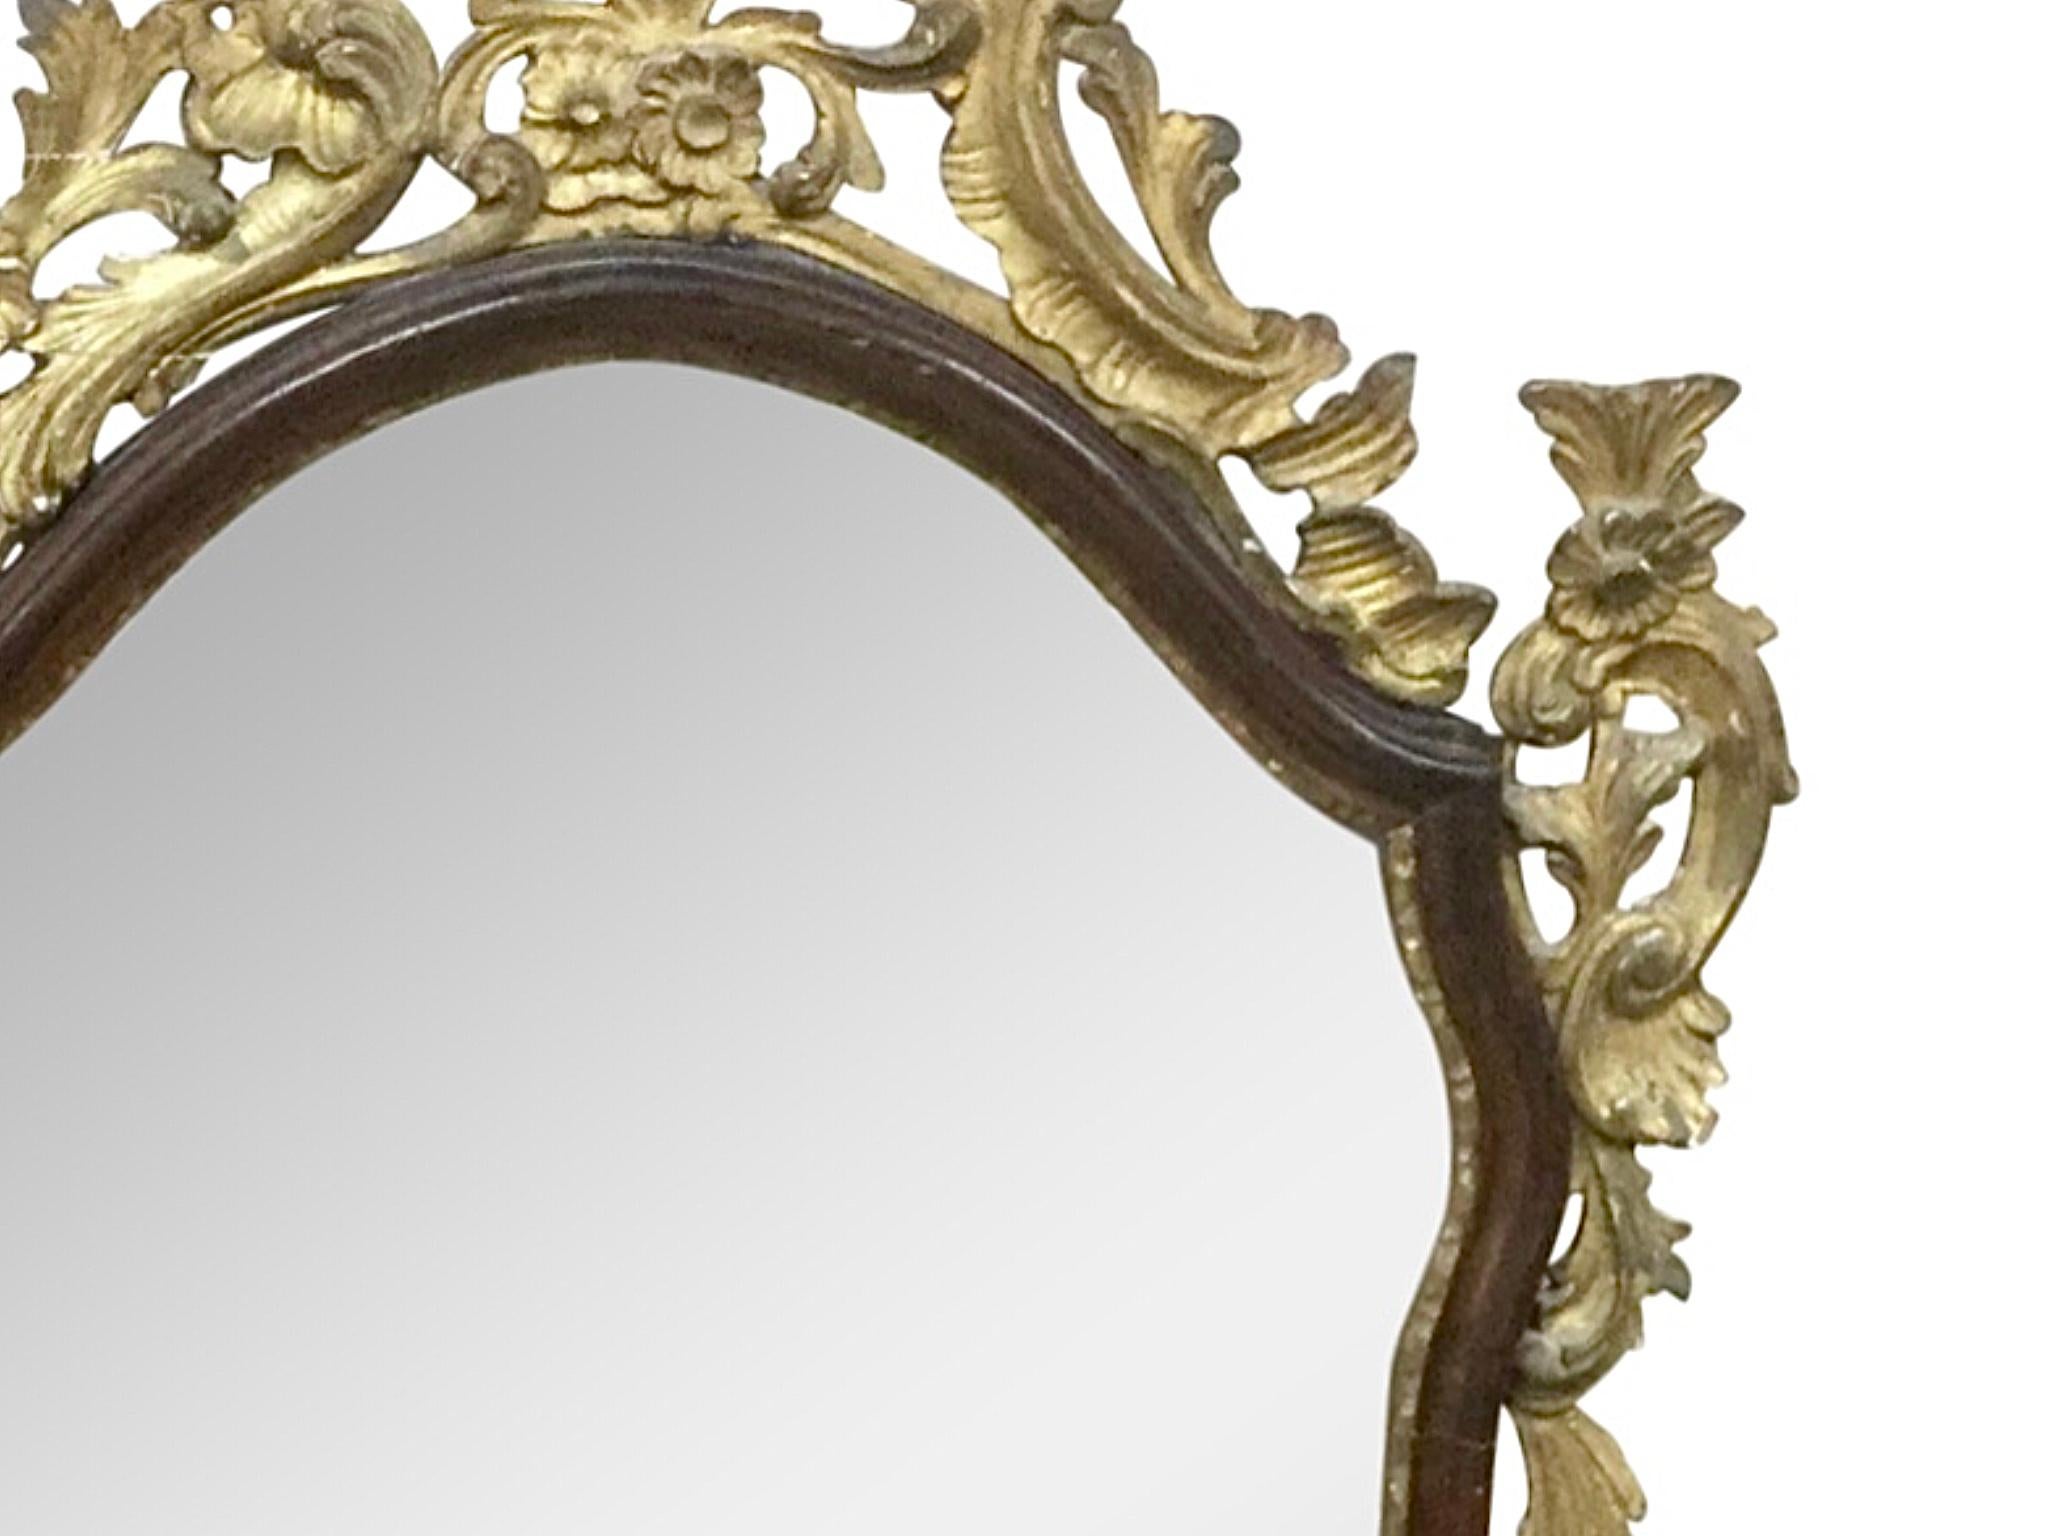 Beautiful Italian Baroque Style ebonized and carved giltwood framed mirror. Carved with floral giltwood details to the crown. The mirror bordered by an ebonized wood frame. Late 19th century.